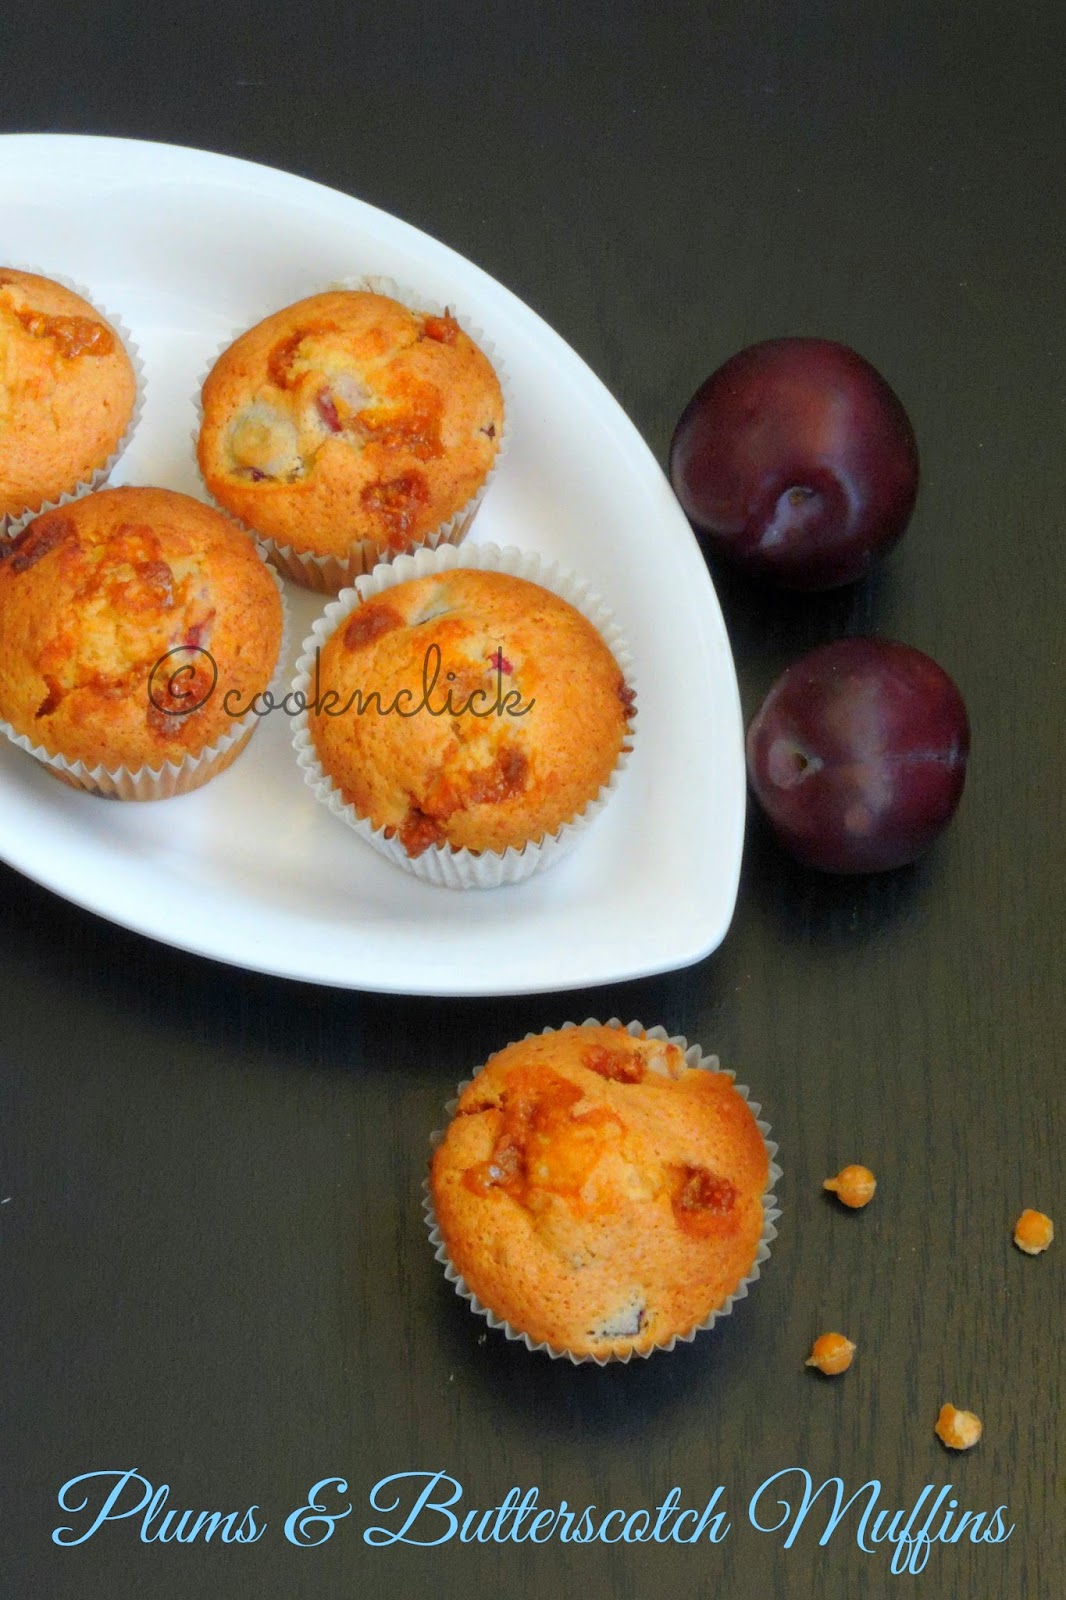 Plums & Buttersctoch chips muffins, muffins with plums and butter scotch chips